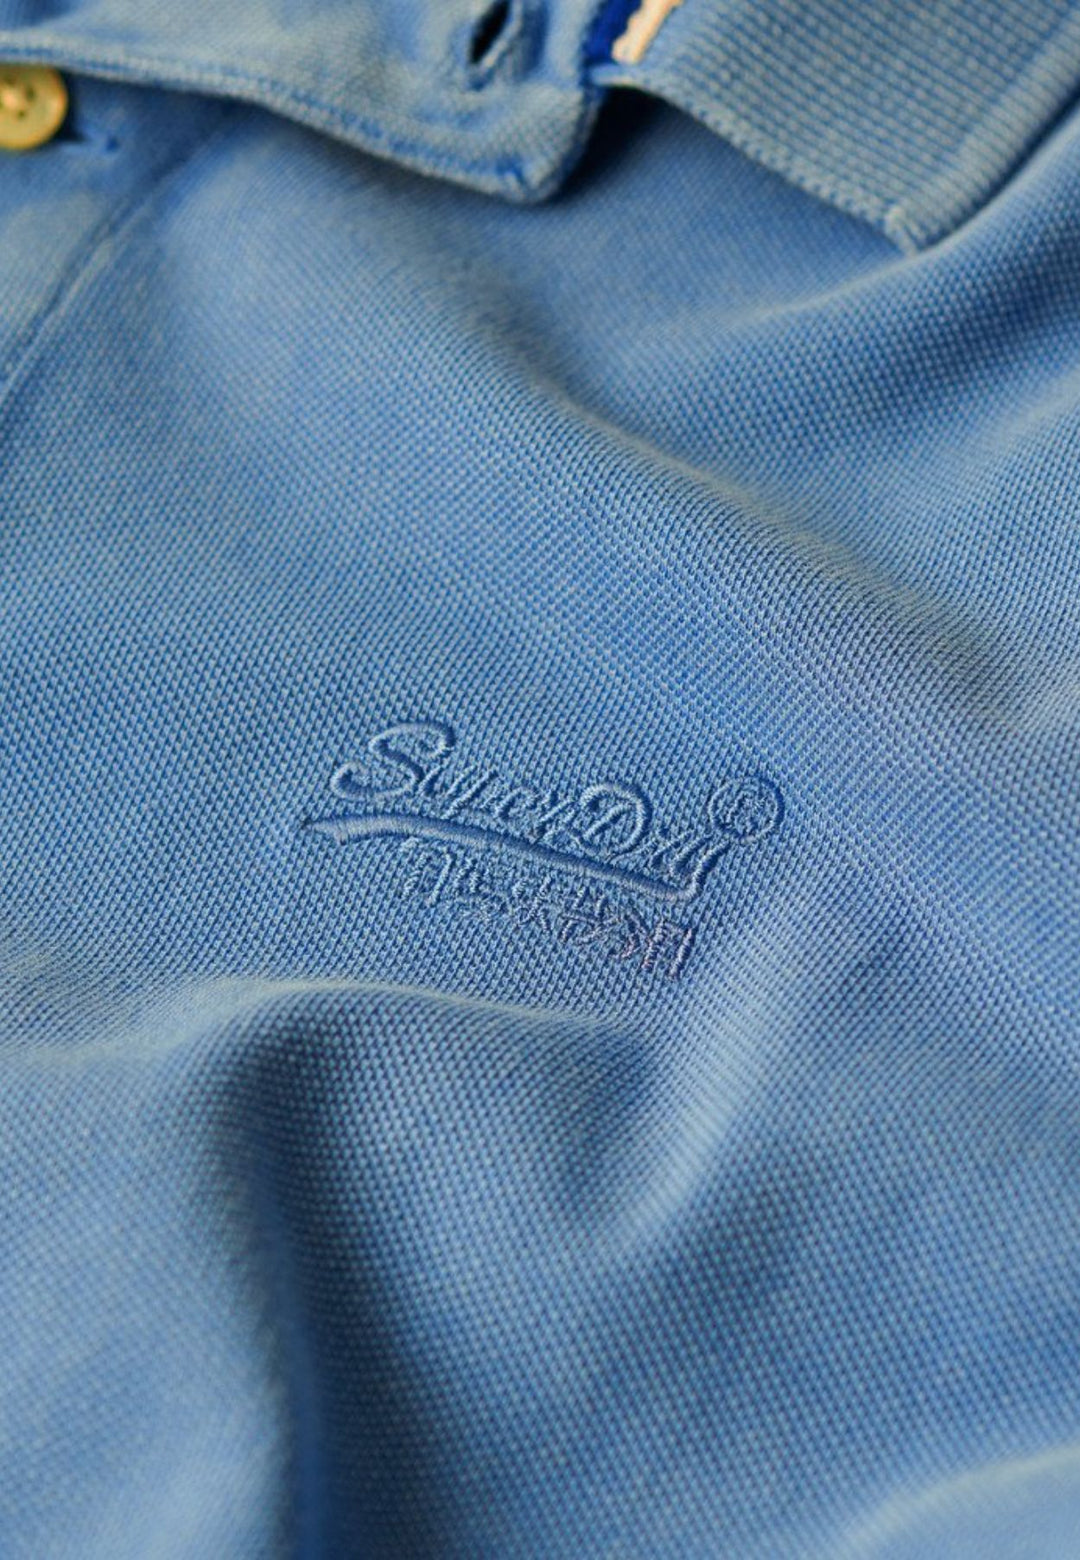 Superdry Destroyed Polo Shirt | Heraldic Blue